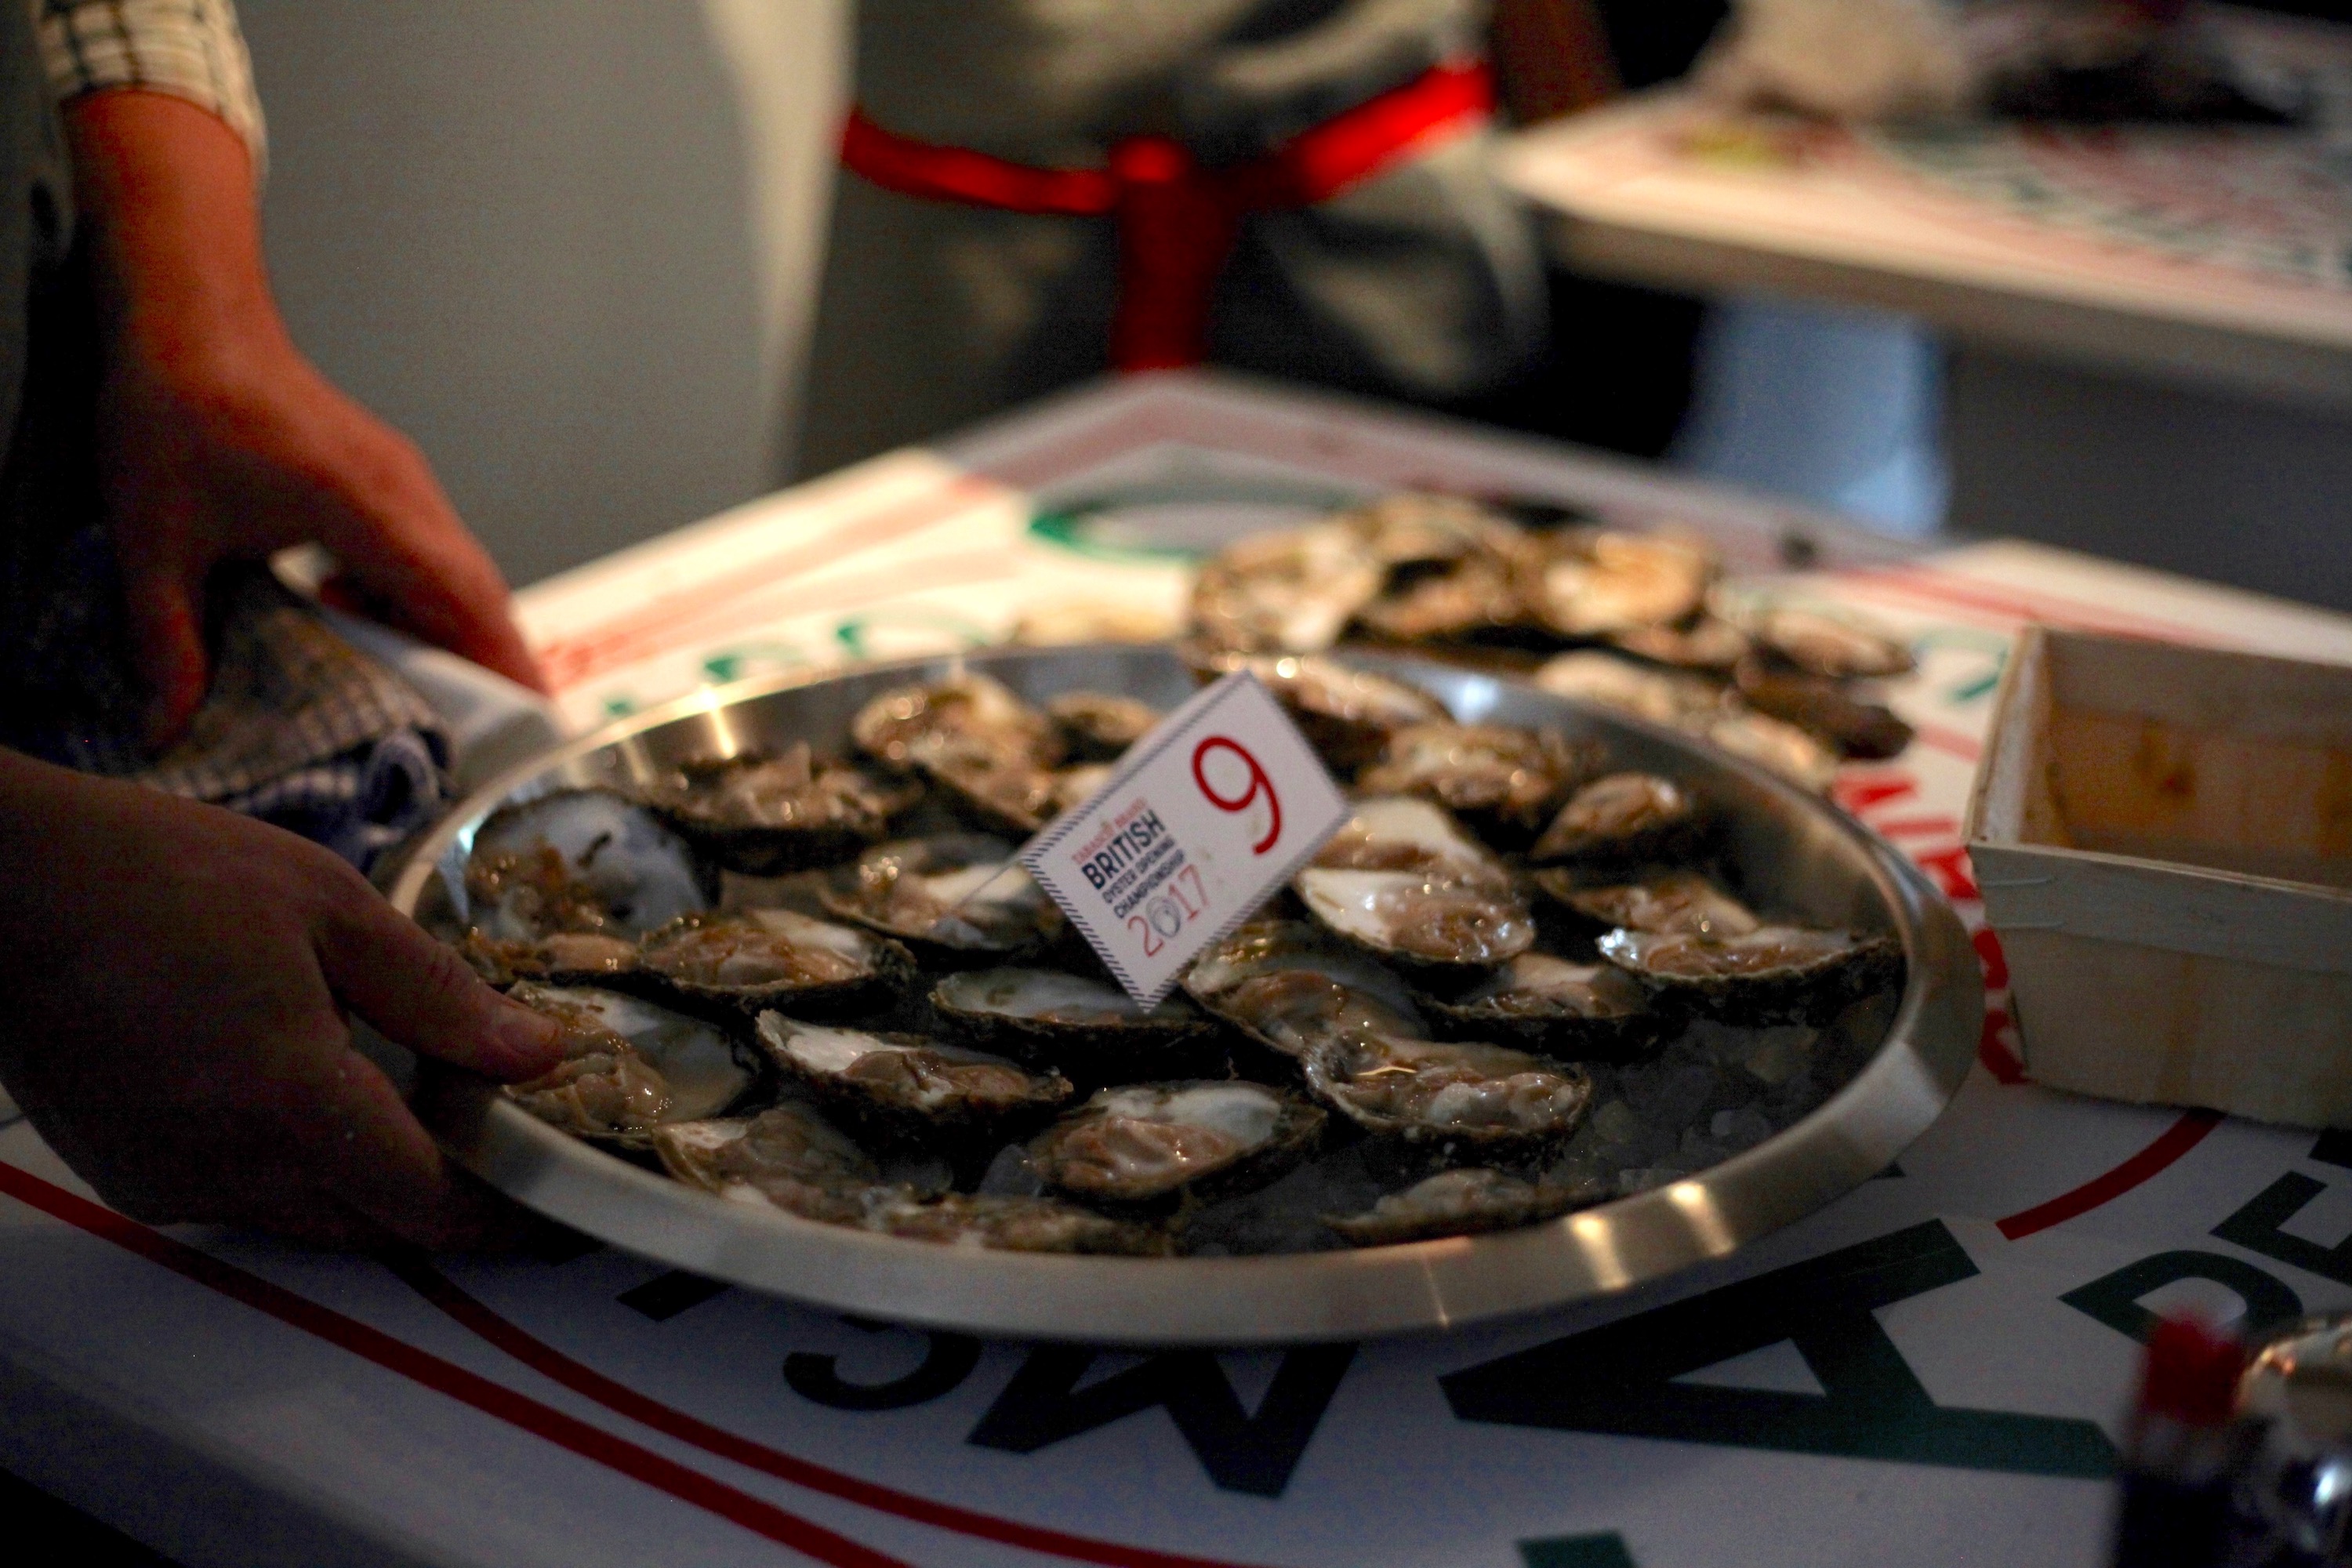 Final platter of shucked oysters, waiting to be judges